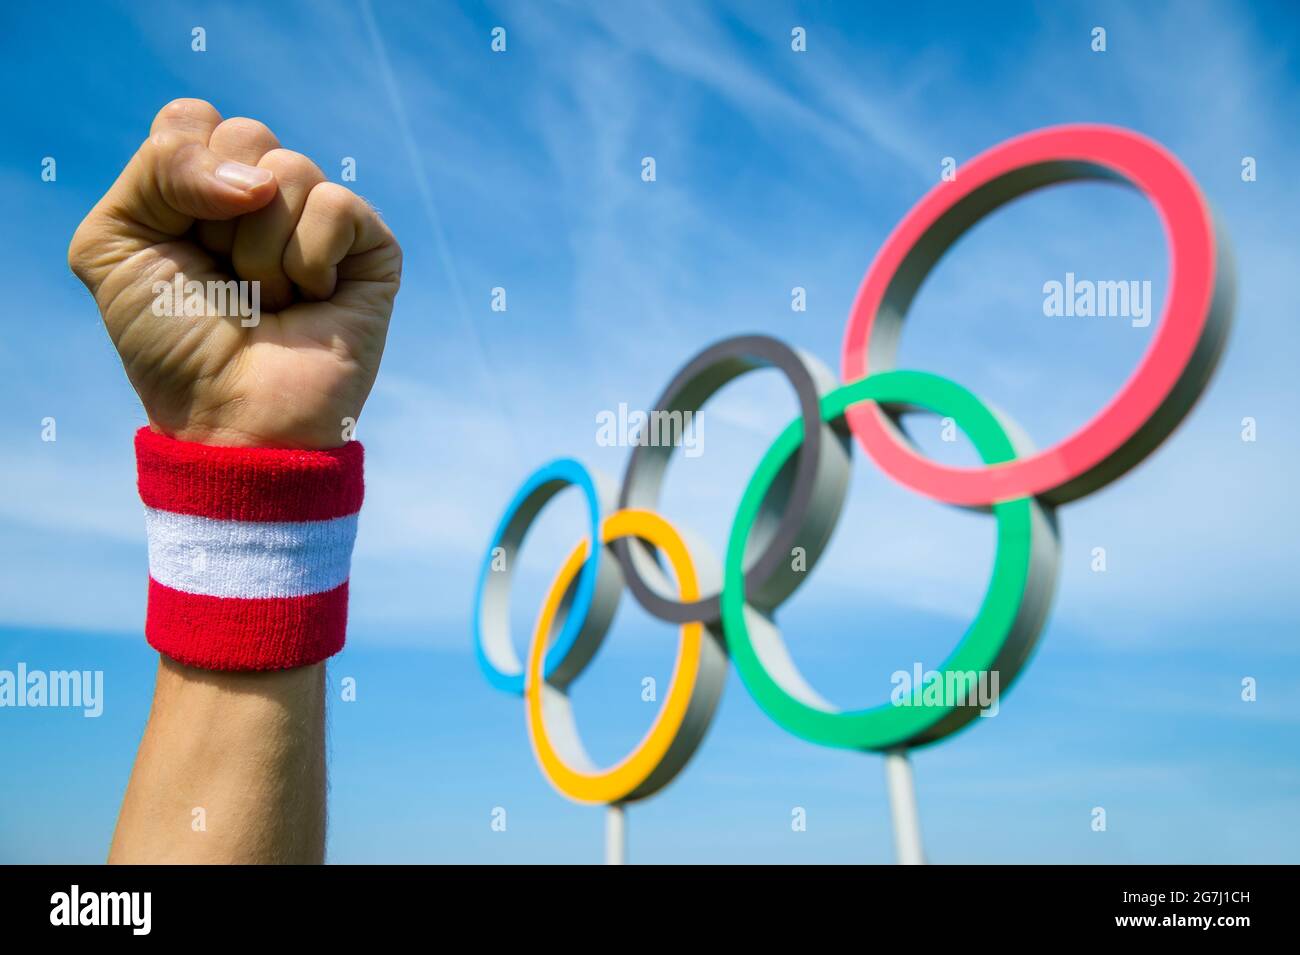 RIO DE JANEIRO - CIRCA MAY, 2016: Japanese athlete wearing red and white wristband punches the air with his fist in front of Olympic Rings Stock Photo